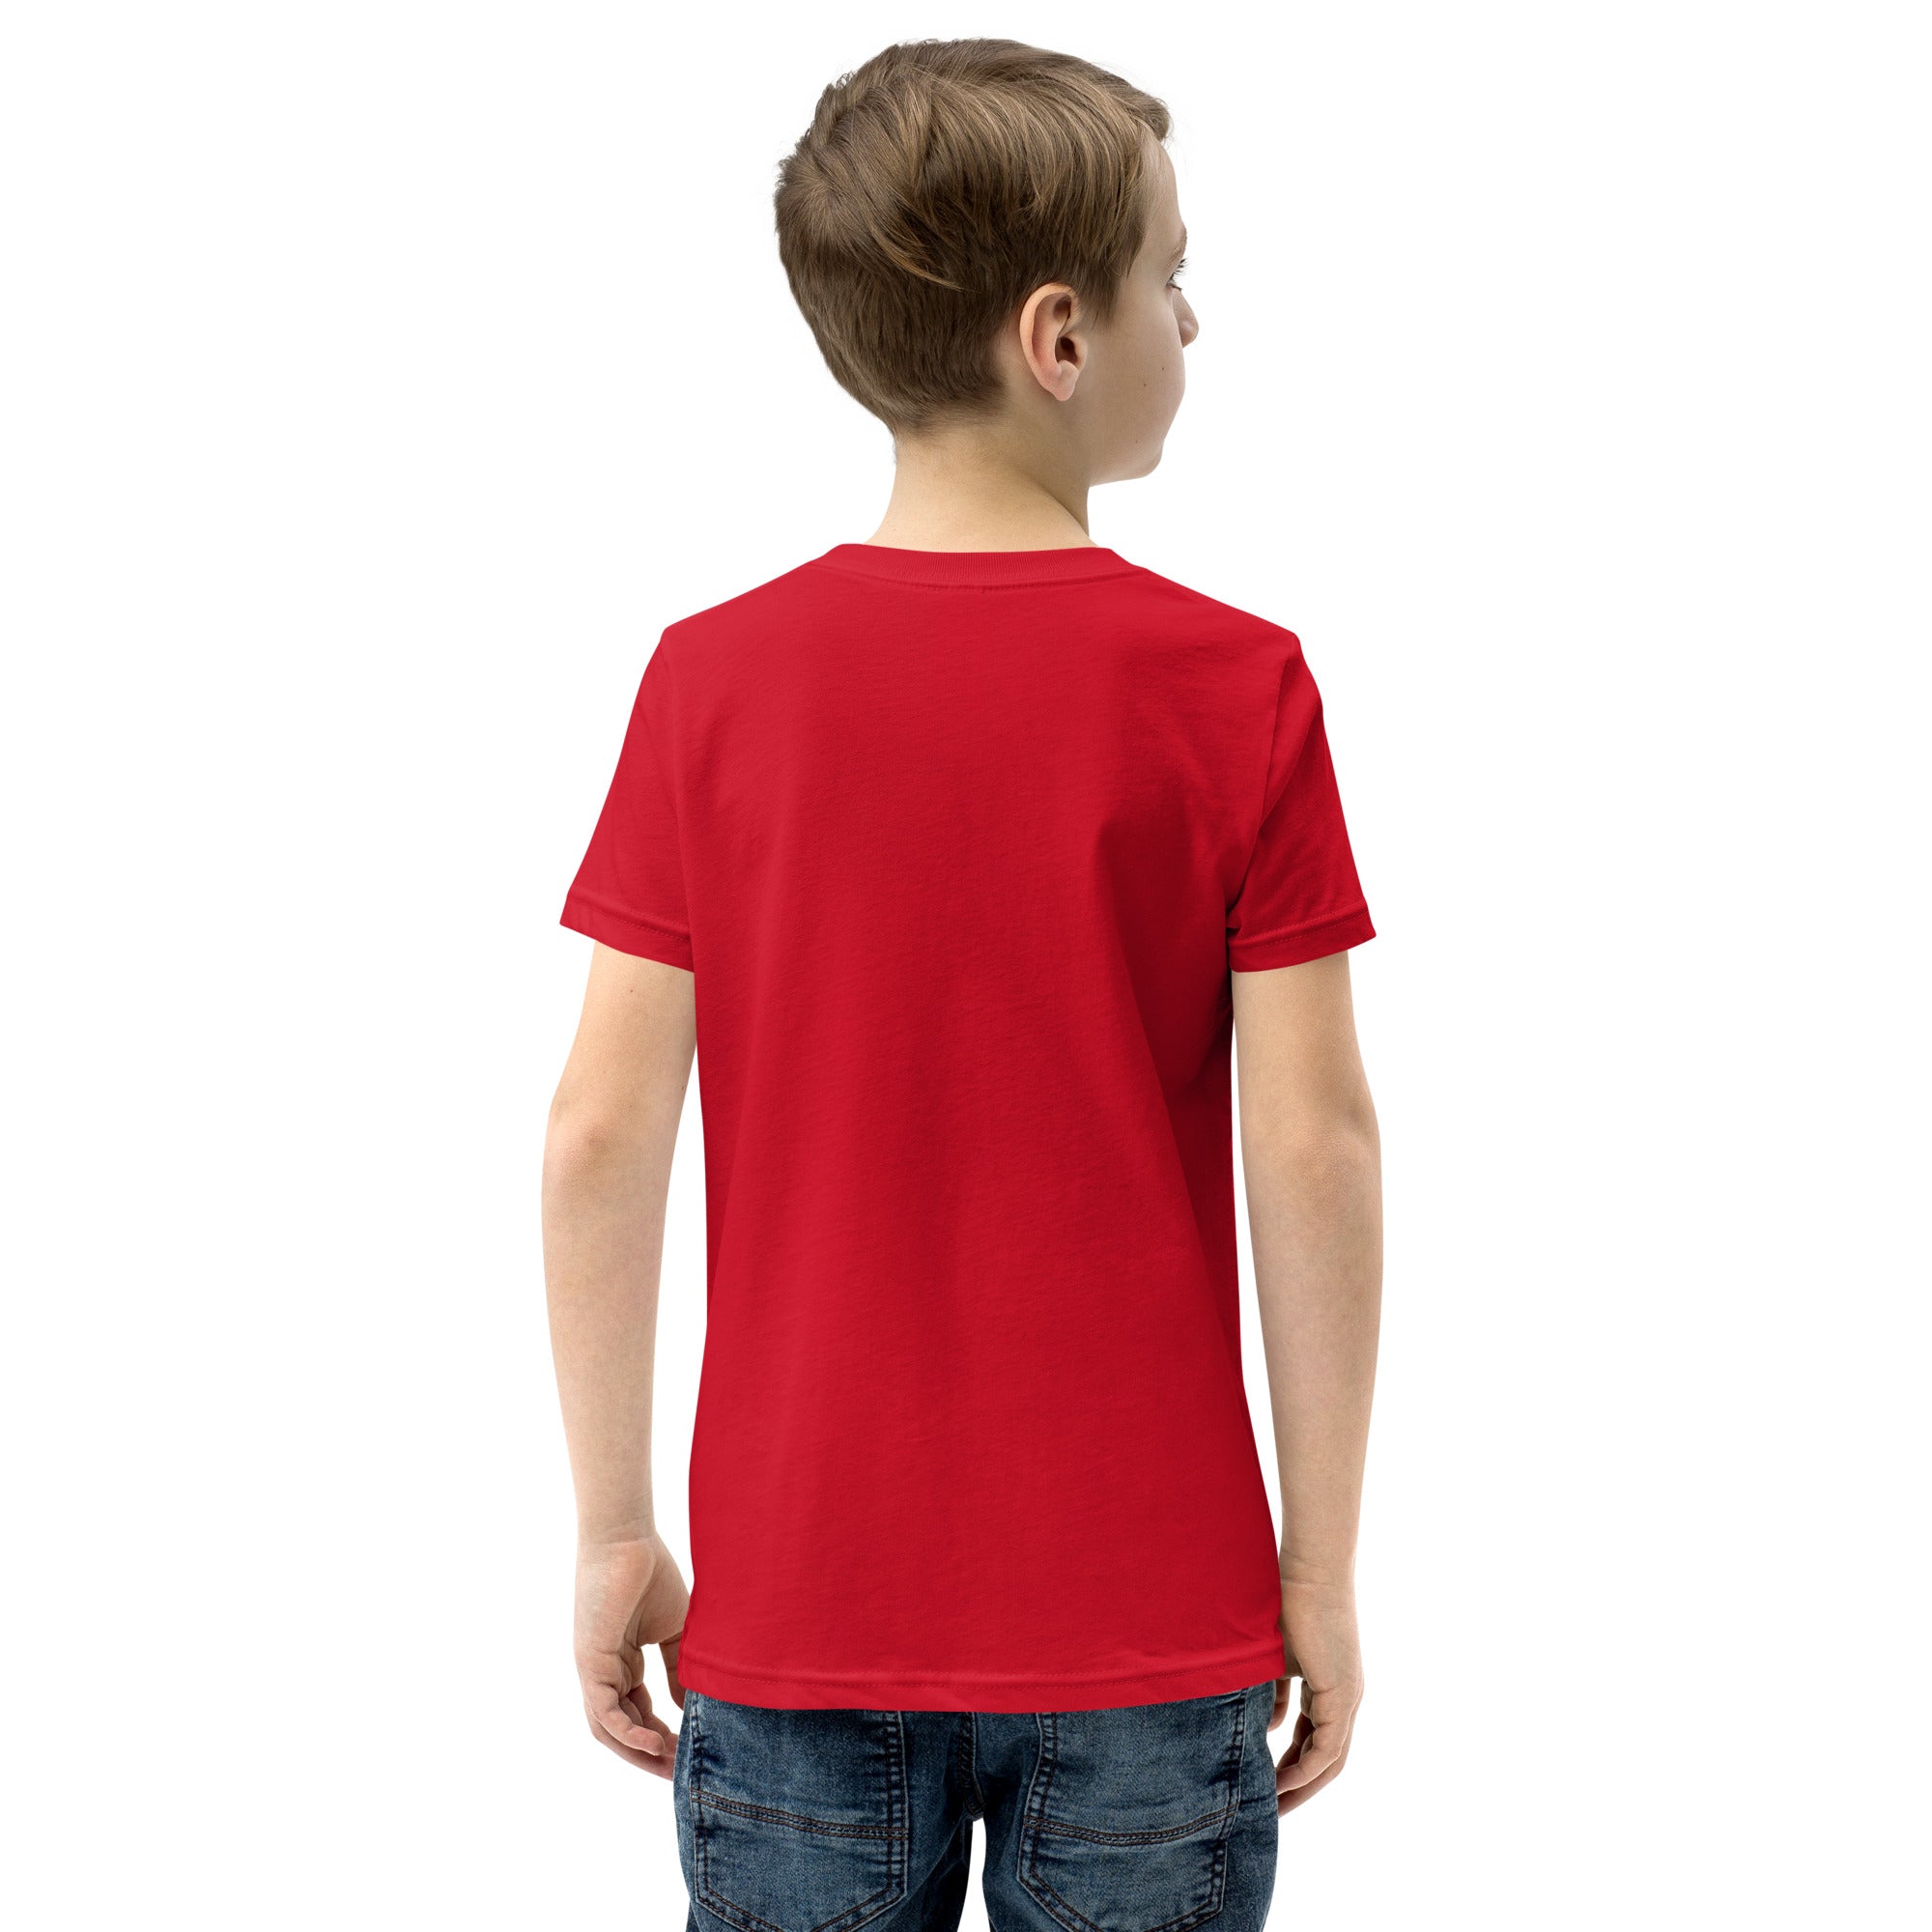 Springfield W Logo - Red Youth Short Sleeve T-Shirt